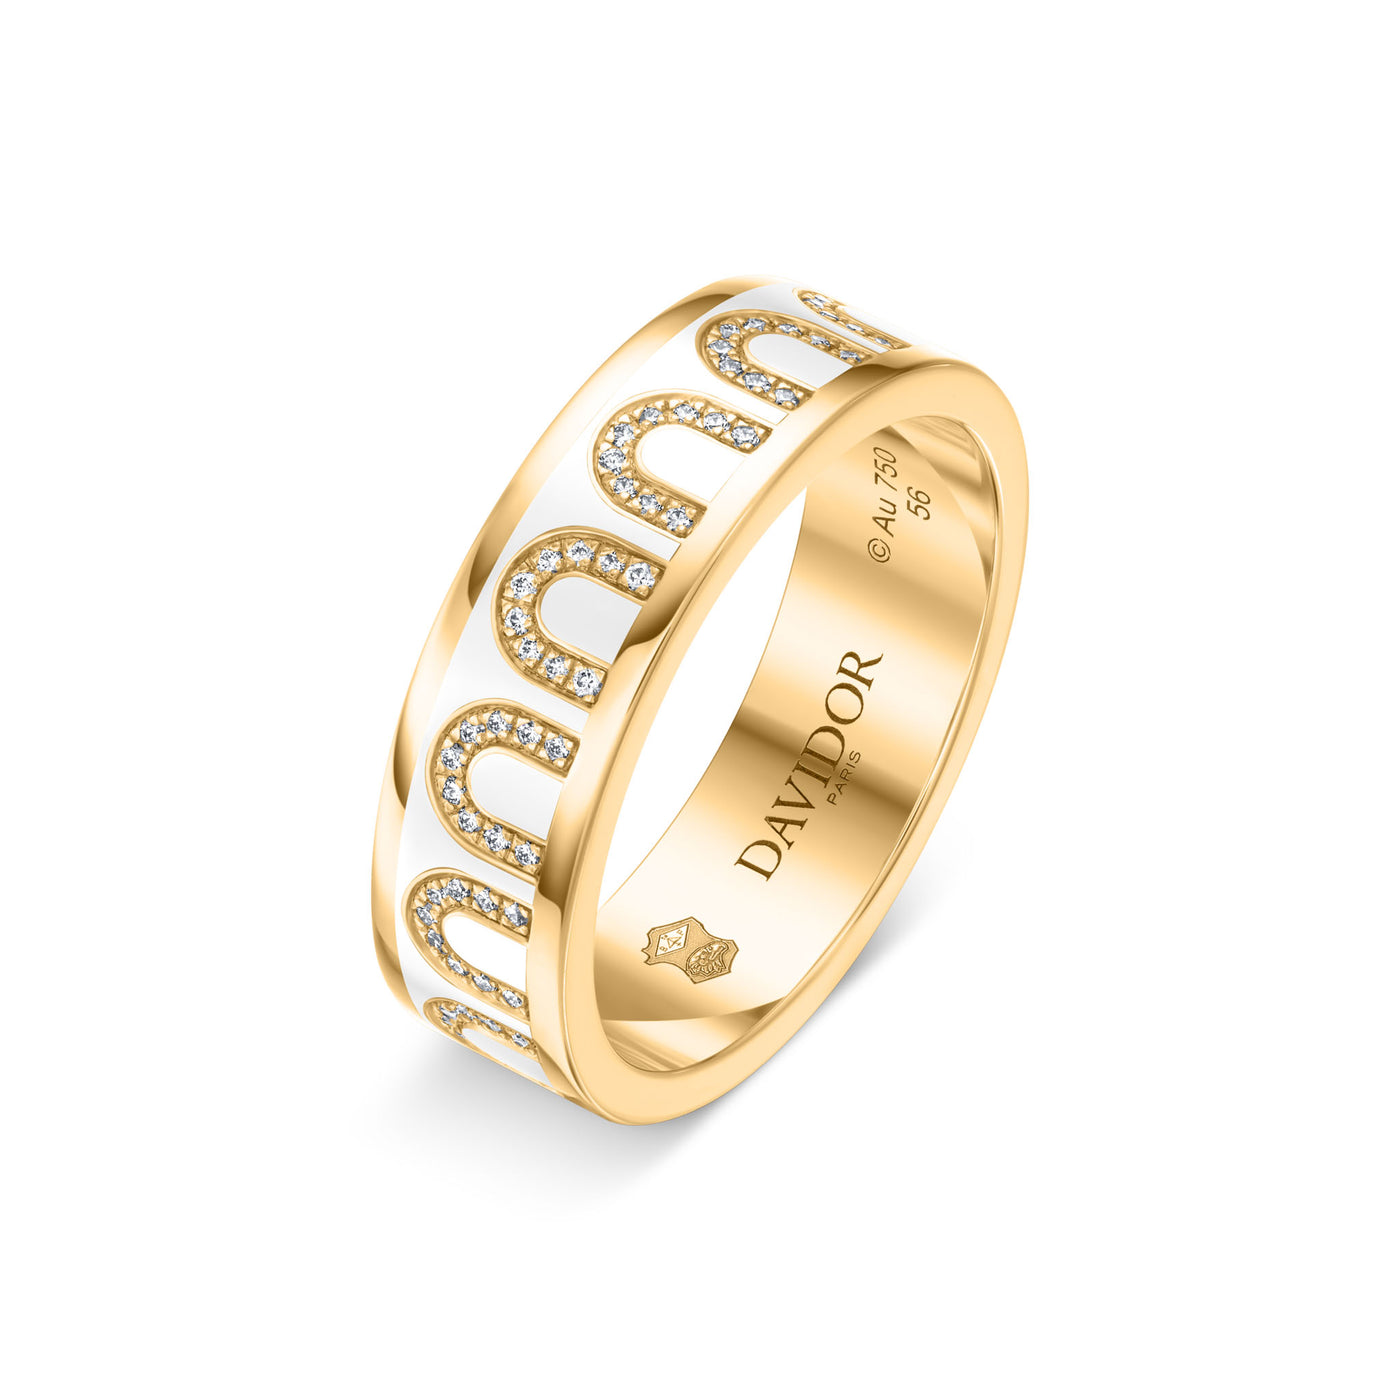 L'Arc De DAVIDOR Bangle MM, 18k Yellow Gold With Lacquered